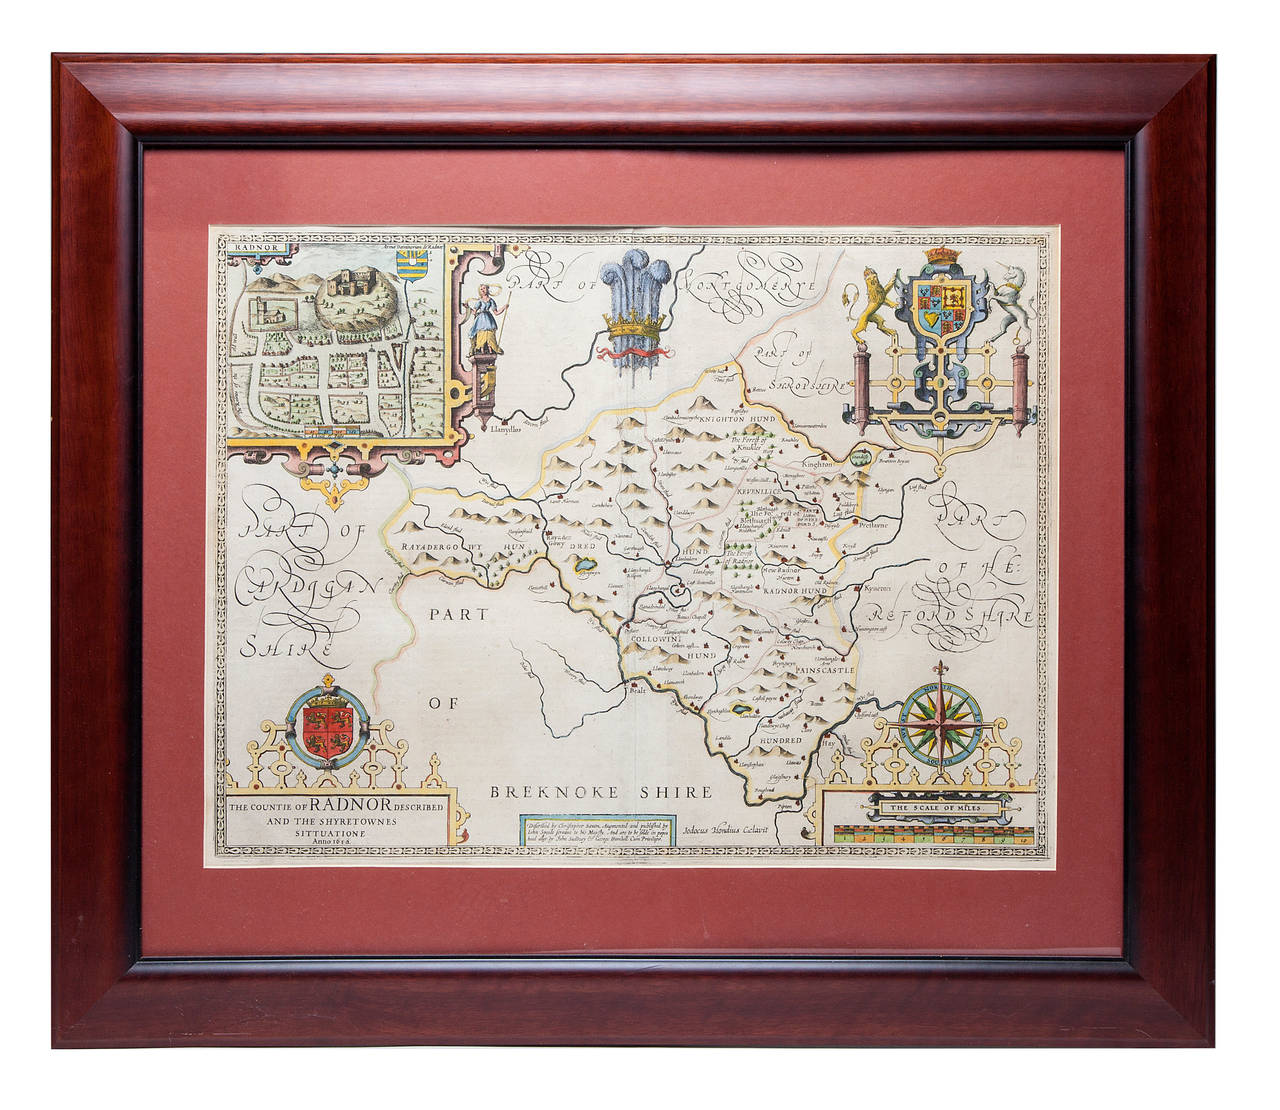 Antique hand-colored engraving of a map of Radnor, Wales from the early 17th century by Christopher Saxton (1543-1610) with an inset plan of Radner. It has a recent mat and frame. Framed the map is 28